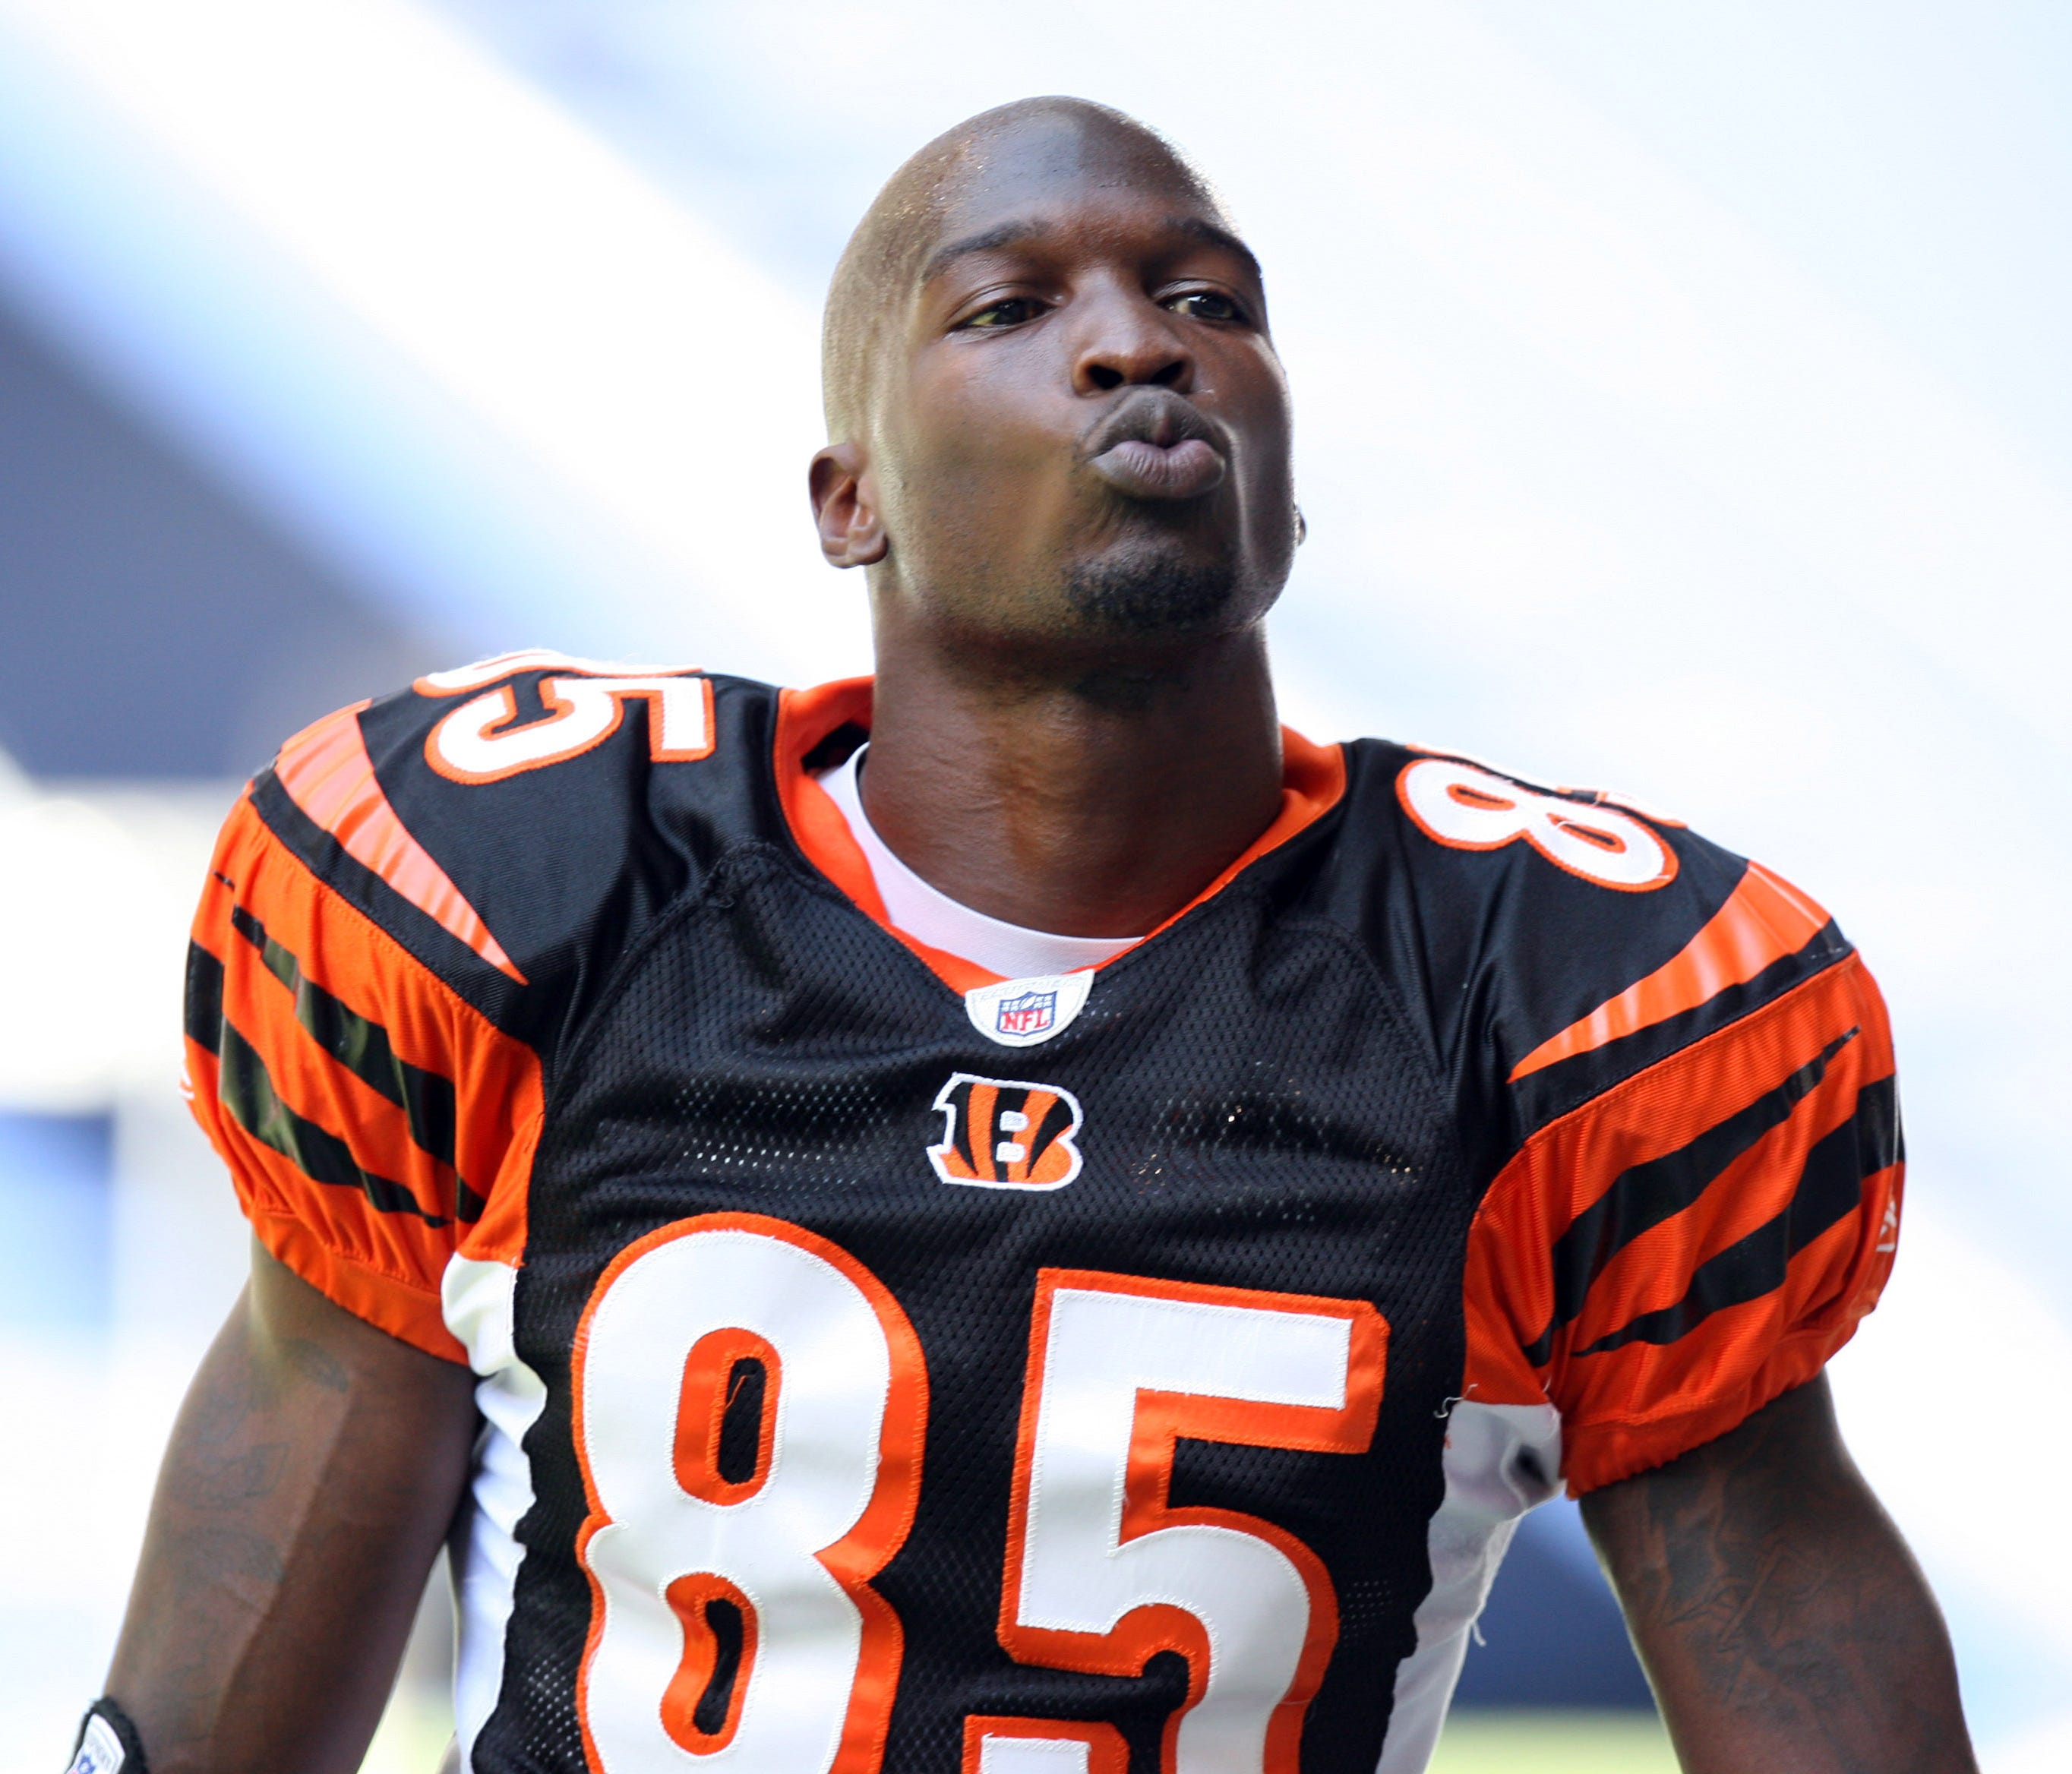 Oct 5, 2008; Irving, TX, USA; Cincinnati Bengals wide receiver Chad Johnson (85) gestures to fans during warm ups before the game against the Dallas Cowboys at Texas Stadium. Dallas defeated Cincinnati 31-22. Mandatory Credit: Nelson Chenault-USA TOD